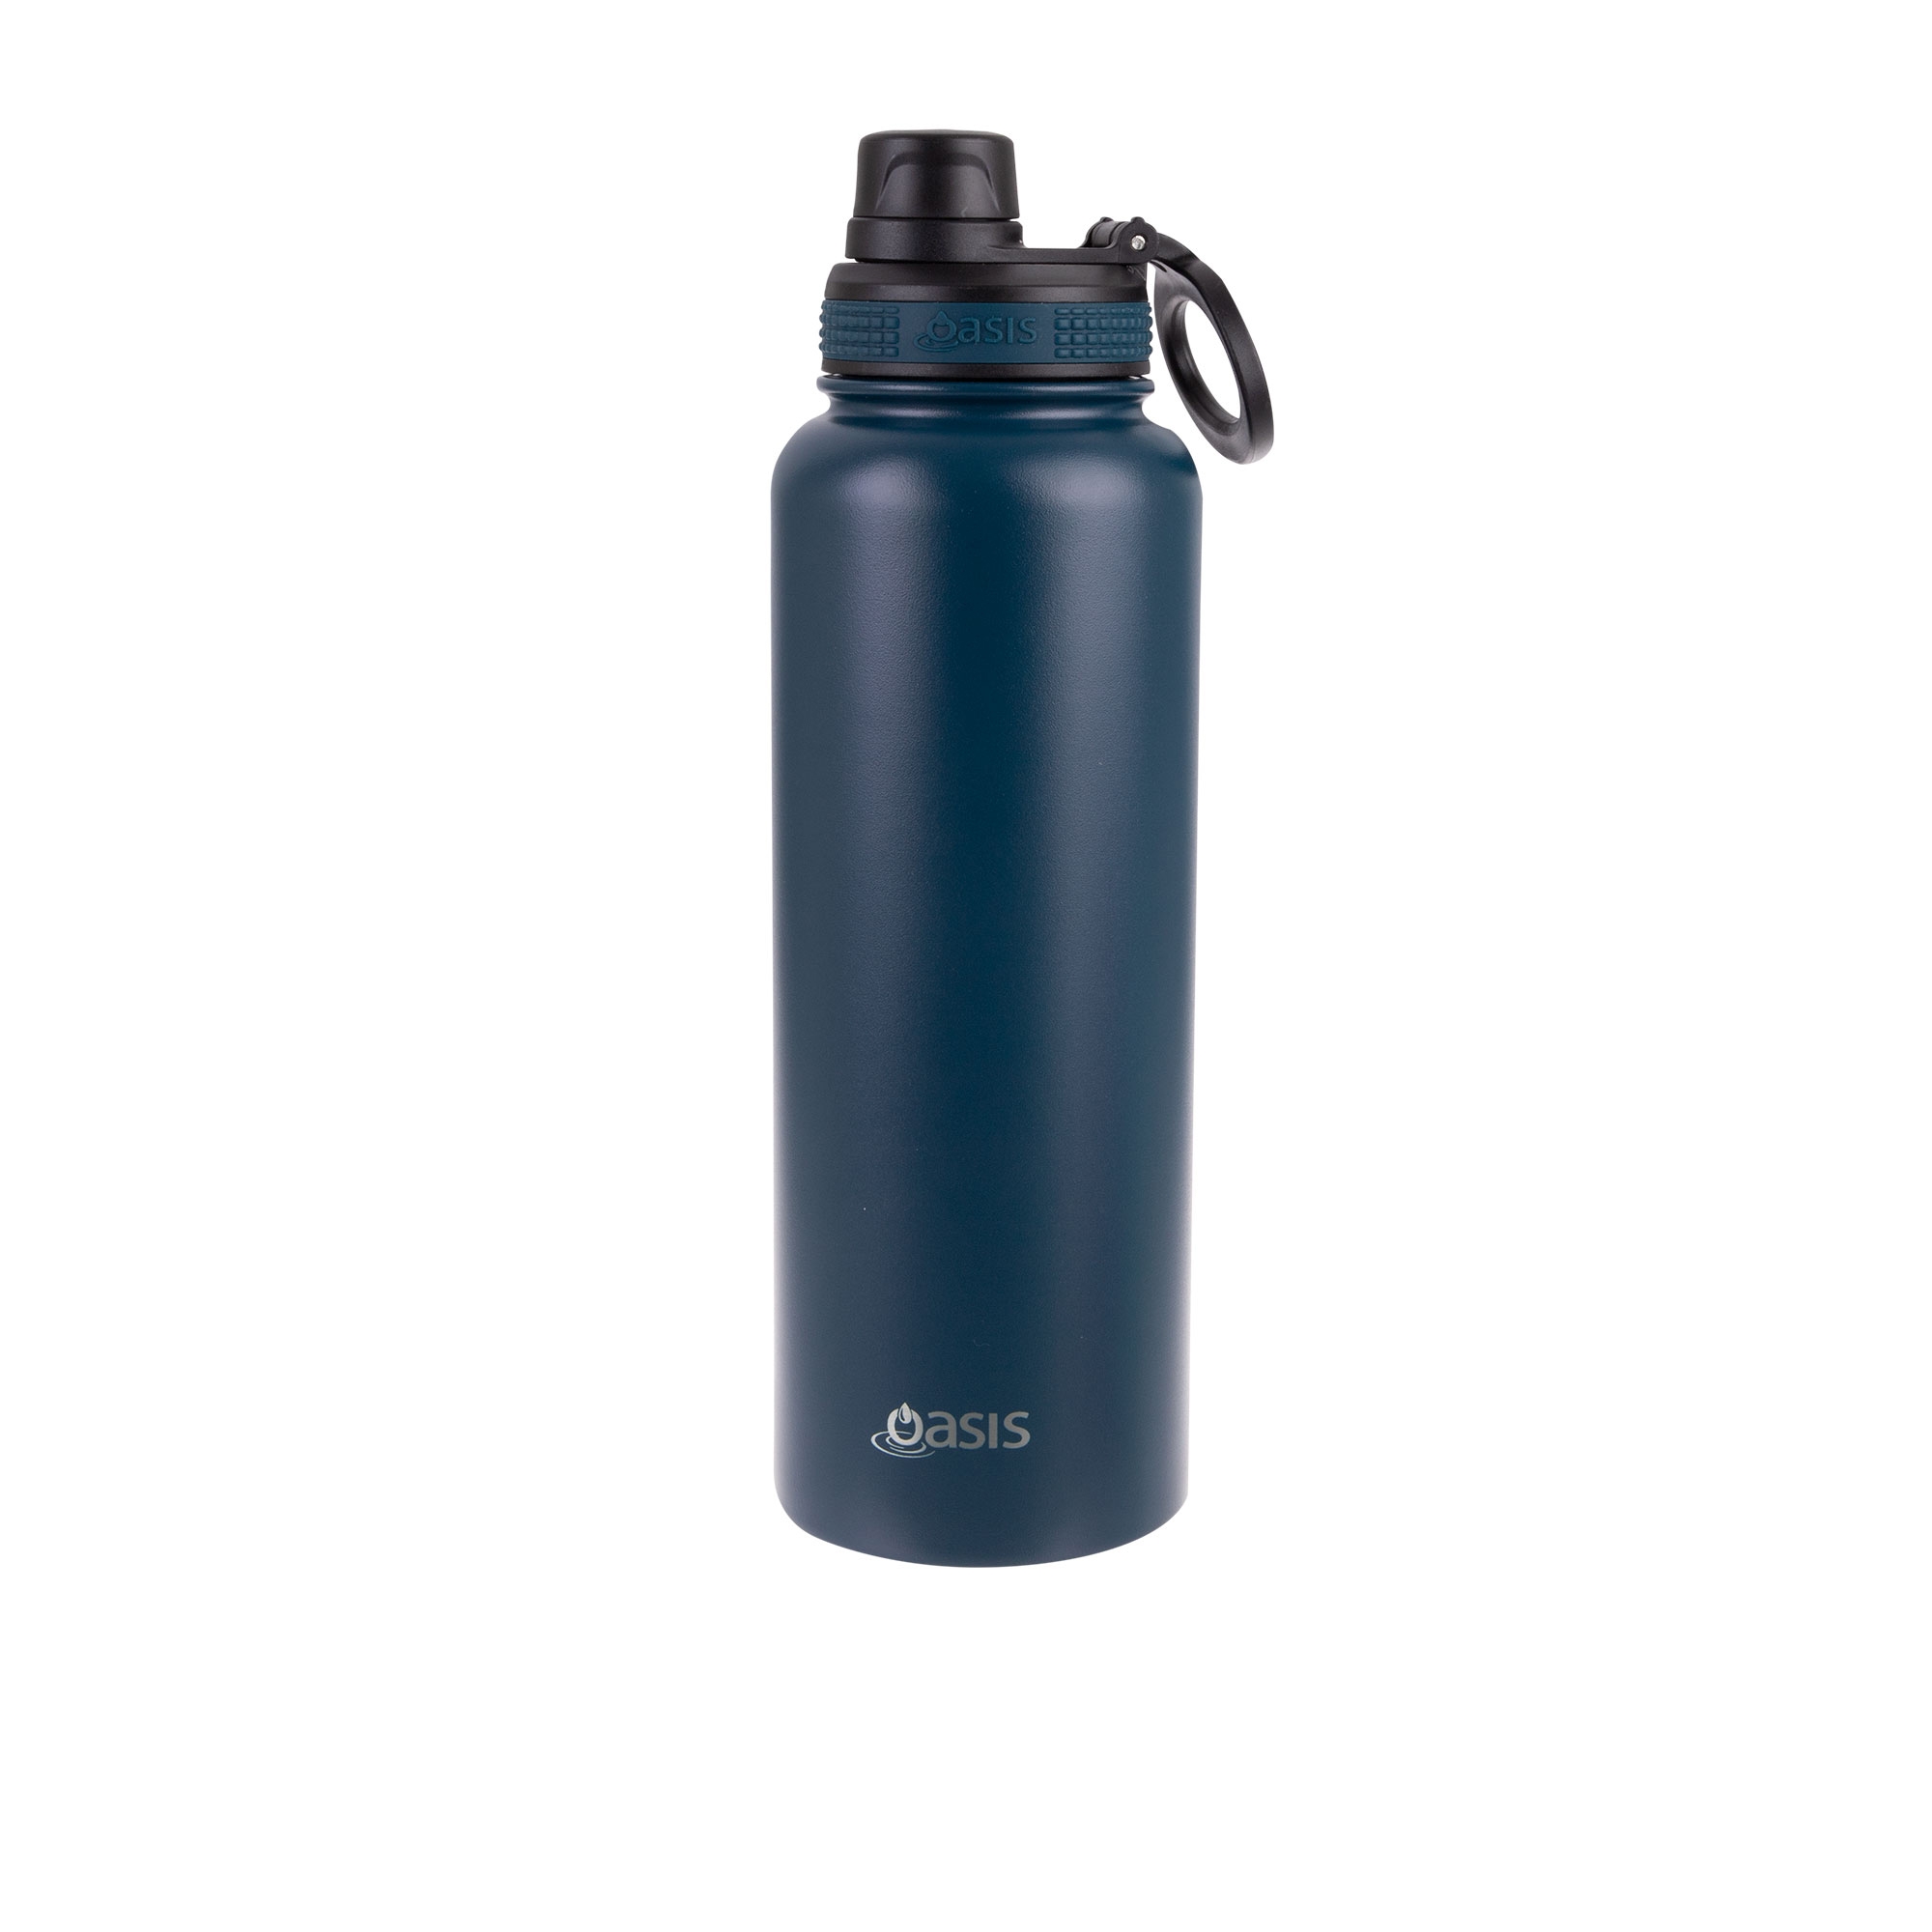 Oasis Challenger Double Wall Insulated Sports Bottle 1.1L Navy Image 1